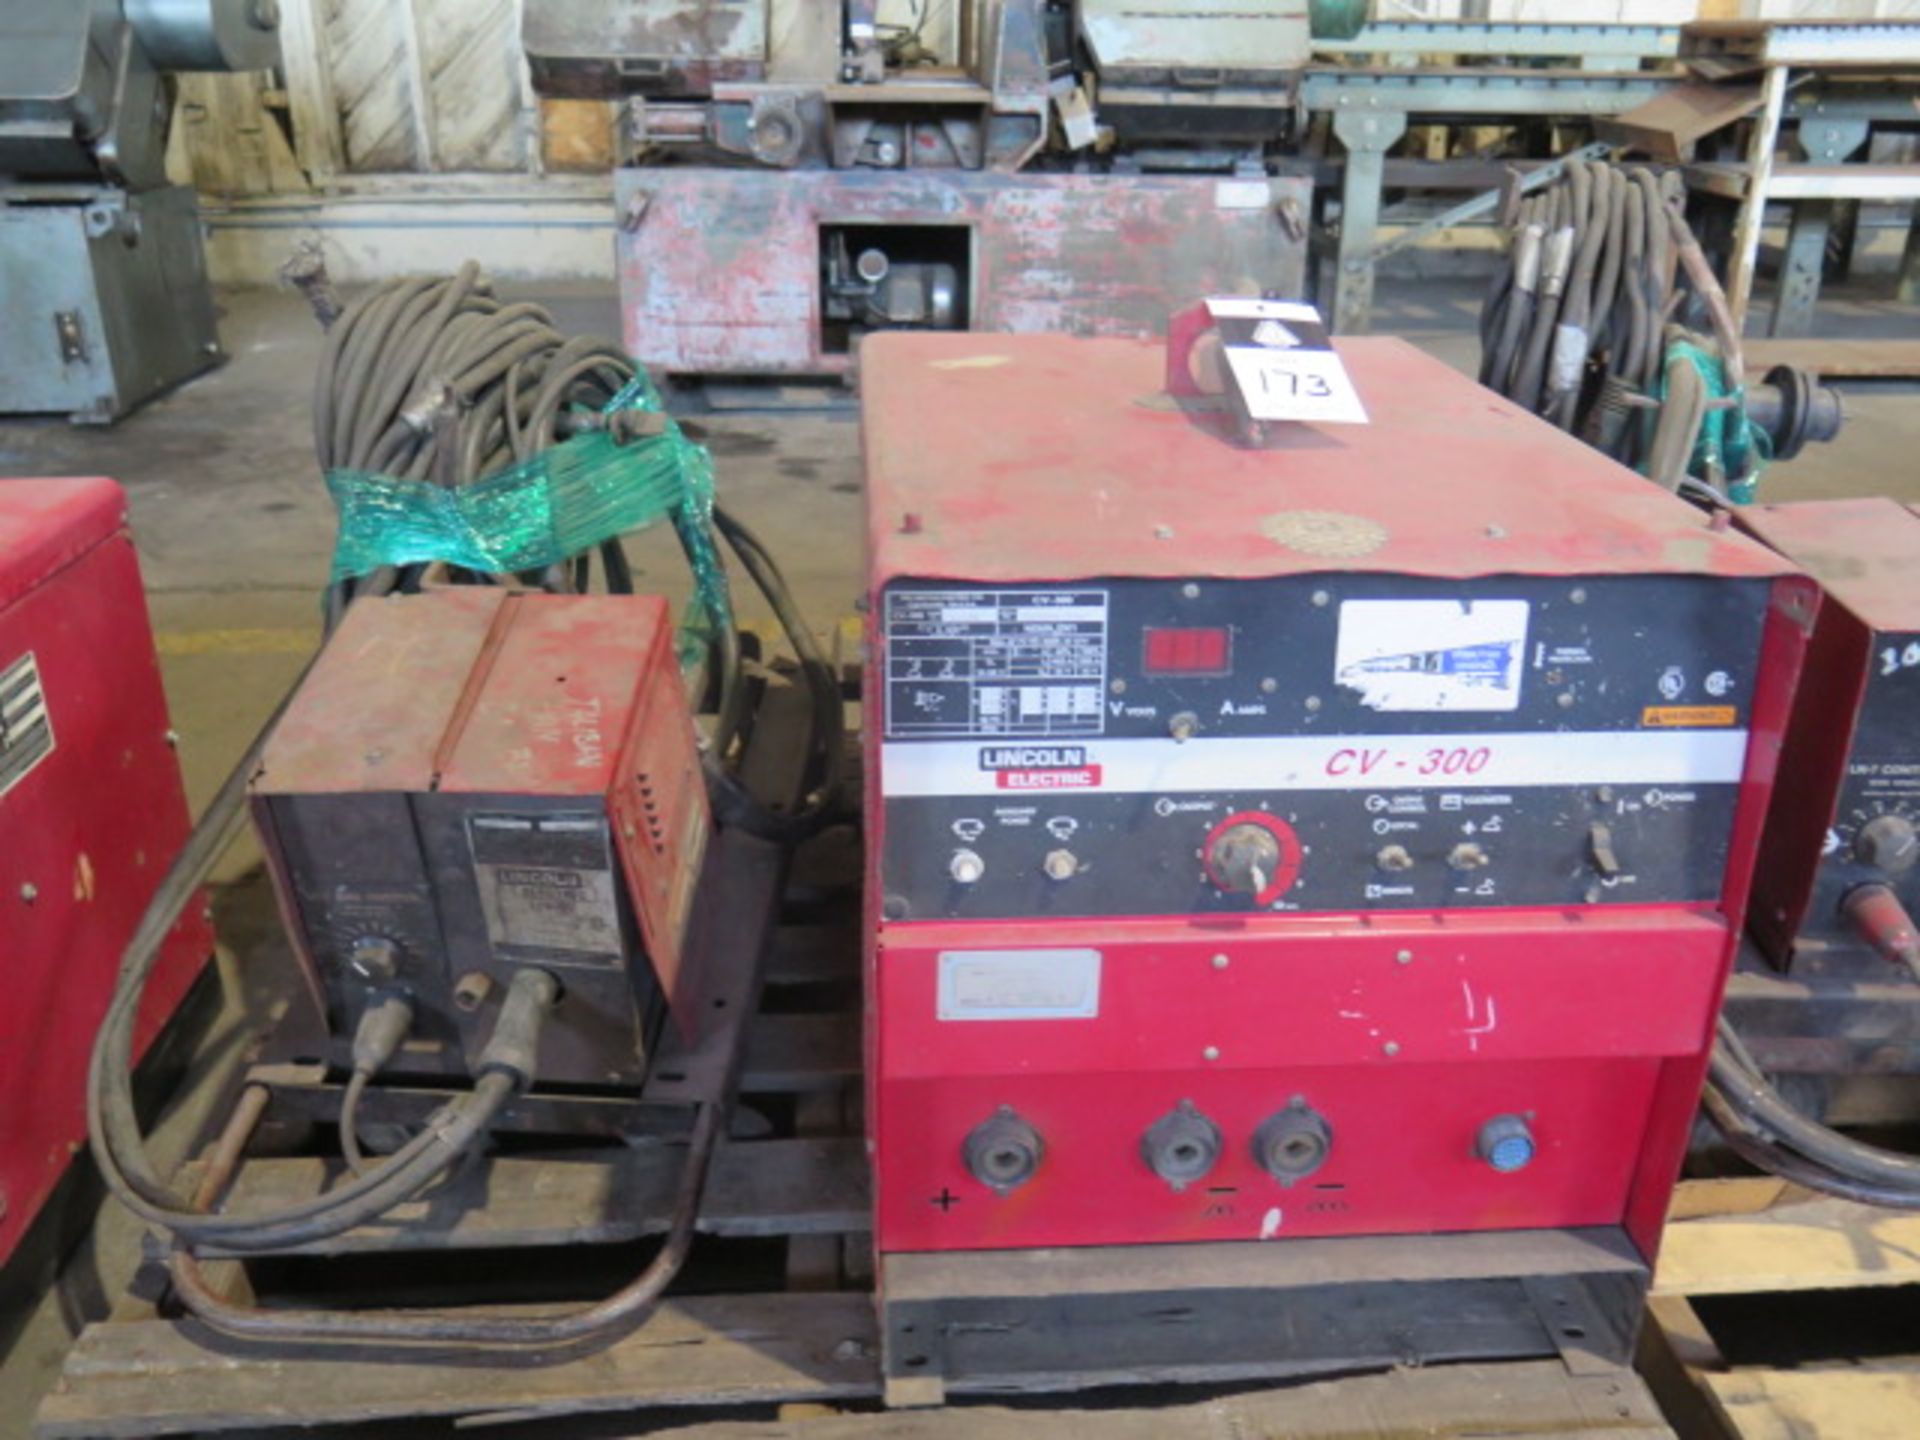 Lincoln CV-305 Arc Welding Power Source w/ Lincoln LN-7 Wire Feeder (NO CABLES) (SOLD AS-IS - NO